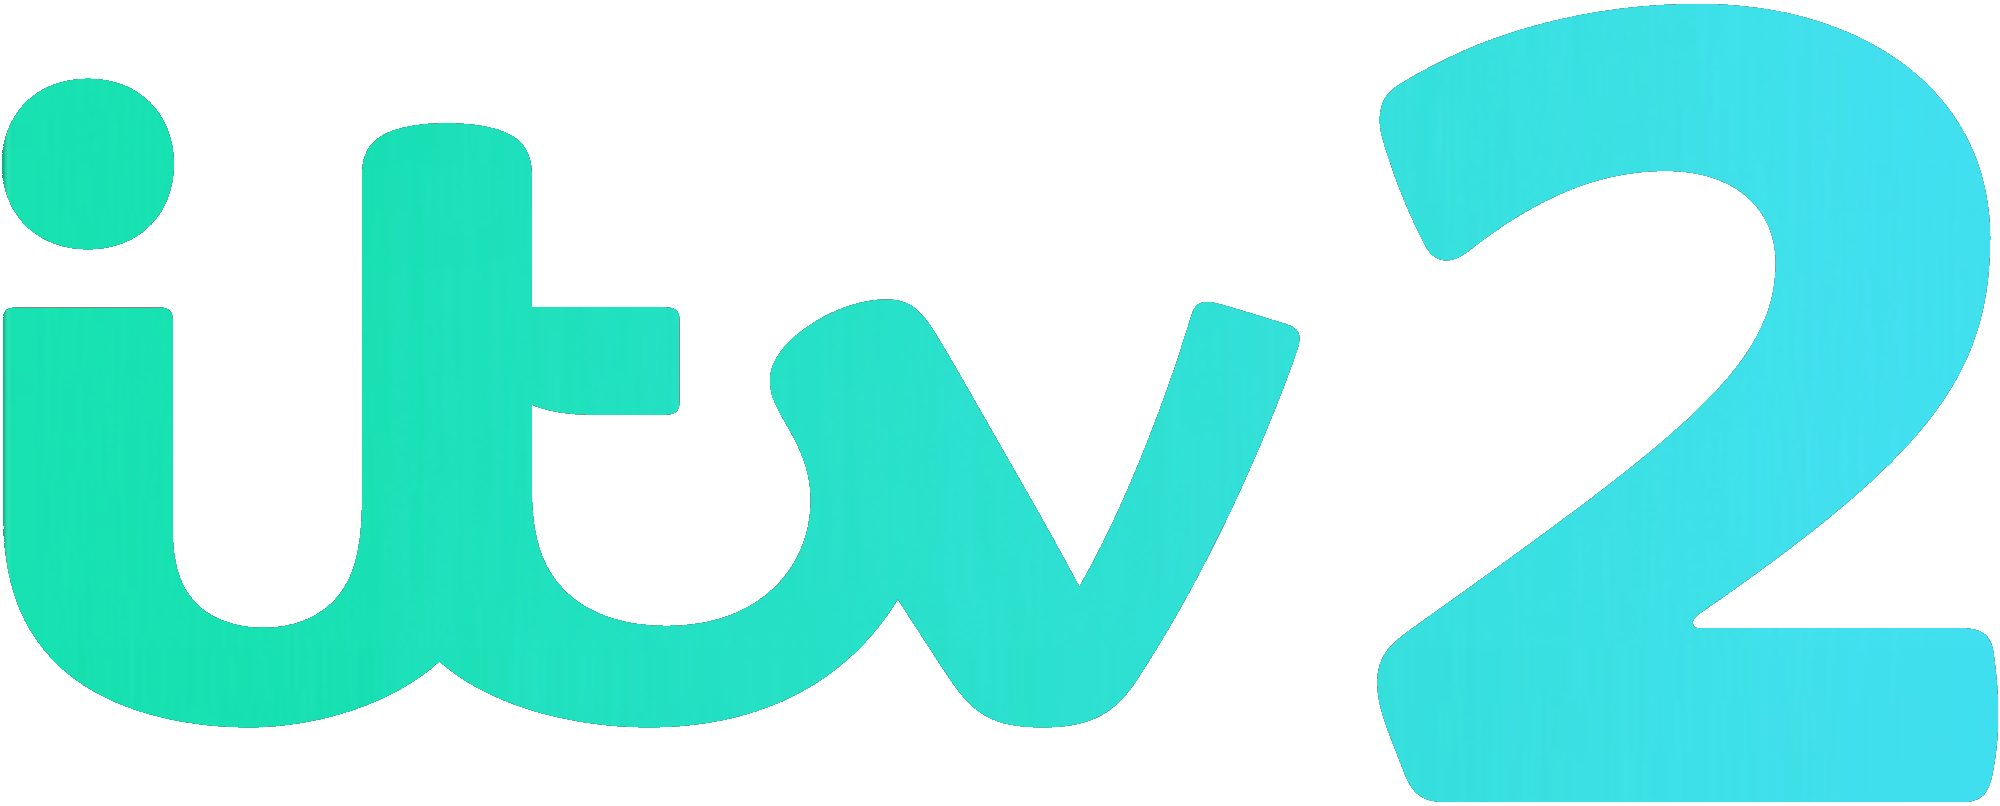 Itv2 Logo 2015.png - Itv2, Transparent background PNG HD thumbnail